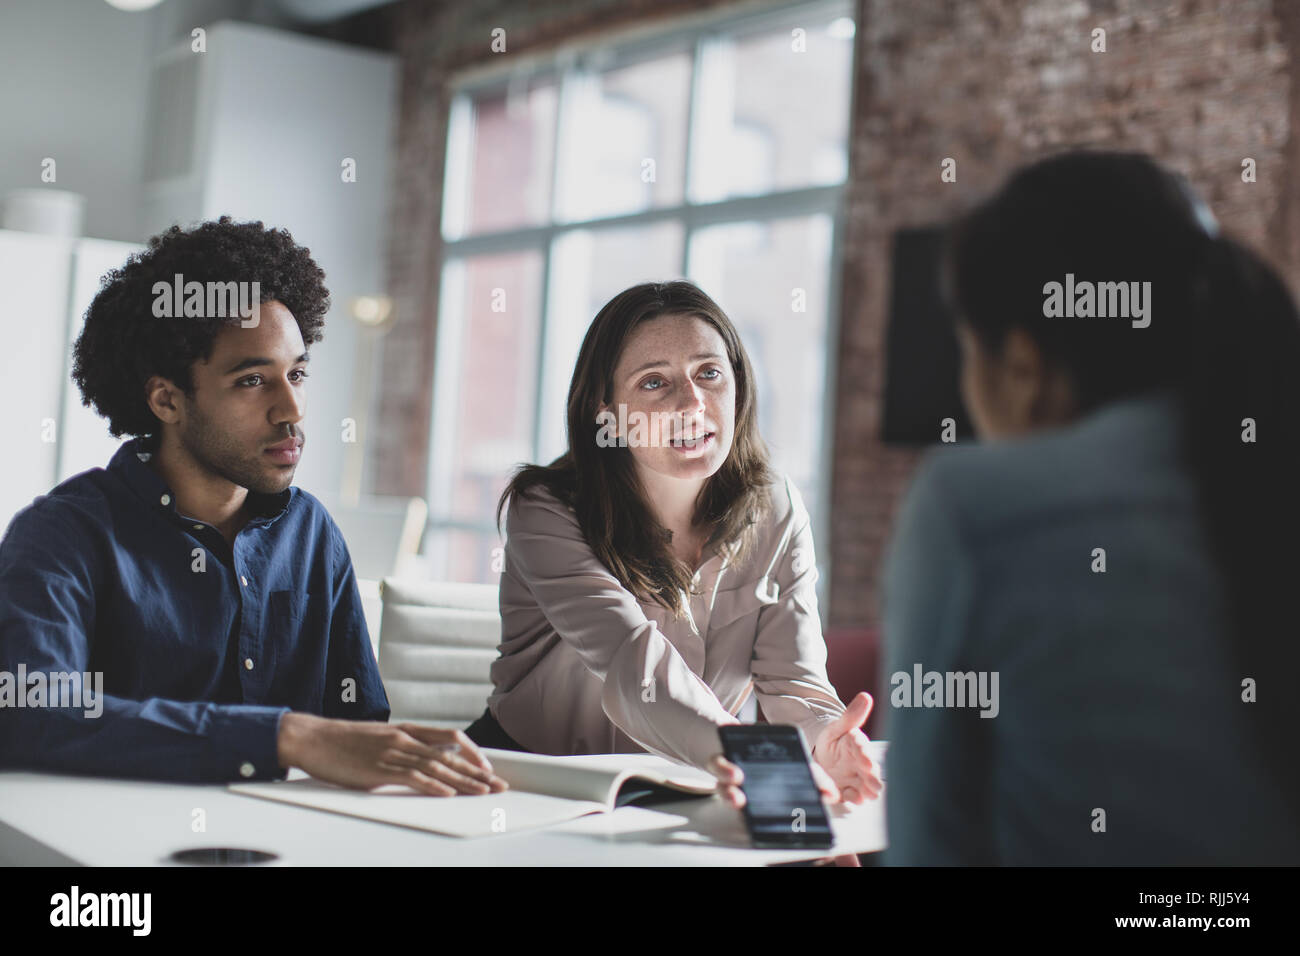 Smartphone app developers in a business meeting Stock Photo